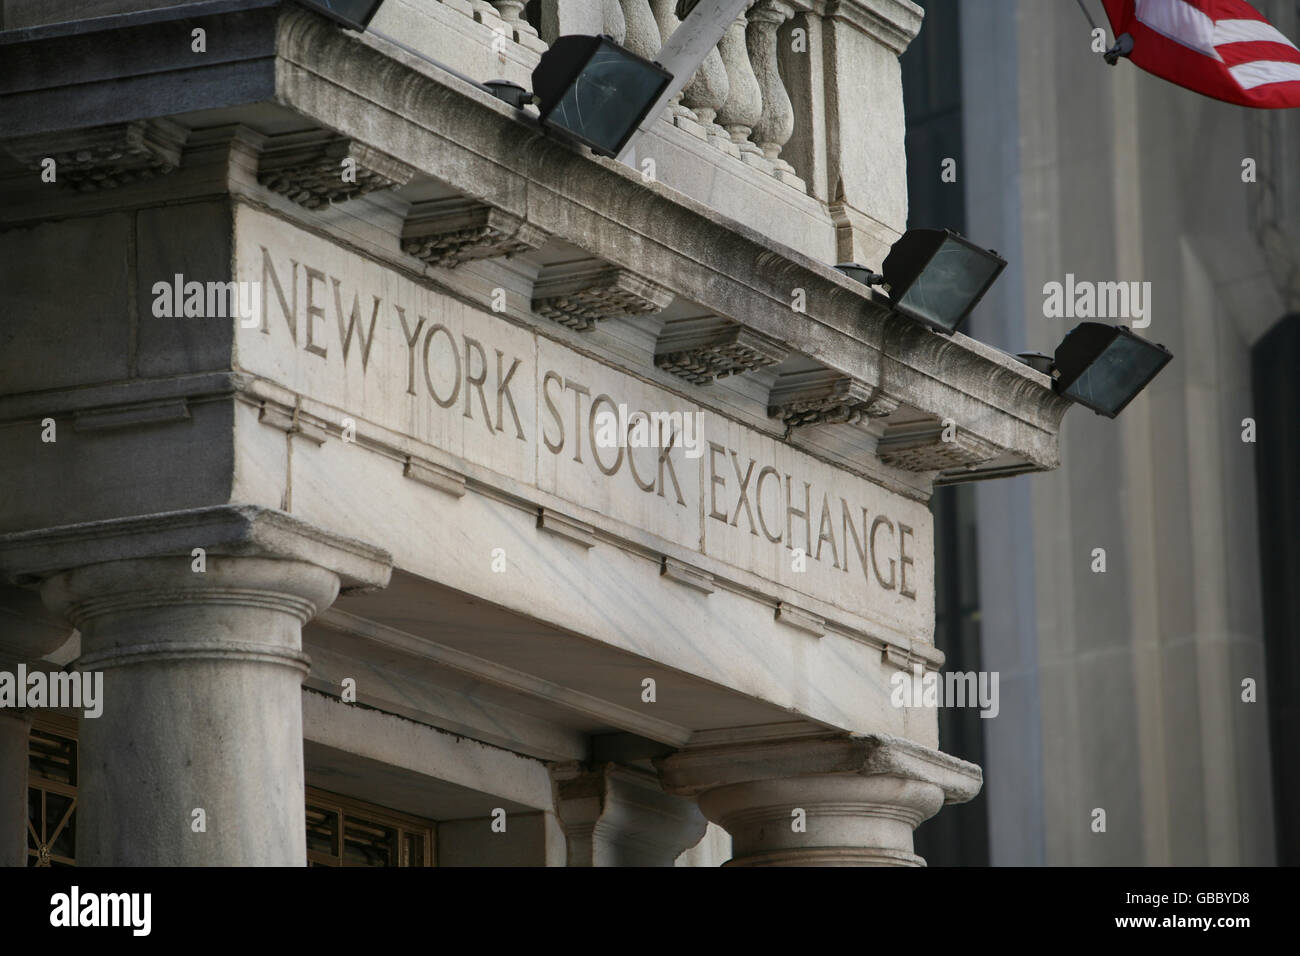 Travel stock - United States of America - New York. The entrance to the New York Stock Exchange on Wall Street. Stock Photo